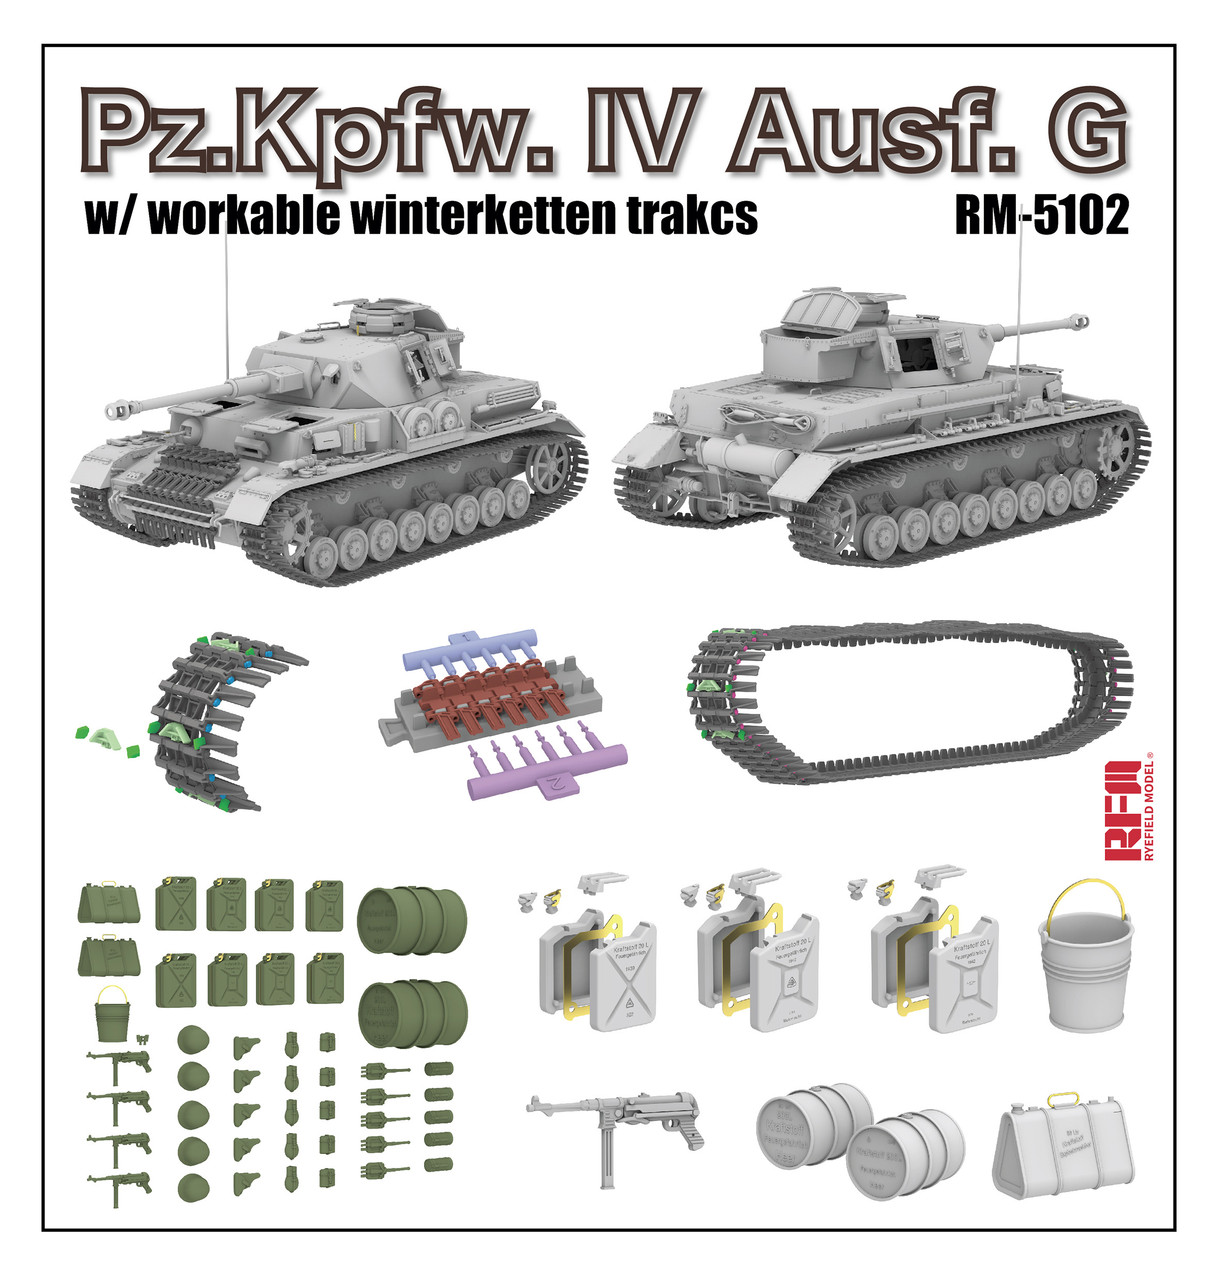 1/35 Panzer Pz.Kpfw.IV Ausf.G with Workable Winterketten Tracks (2in1) - 5102